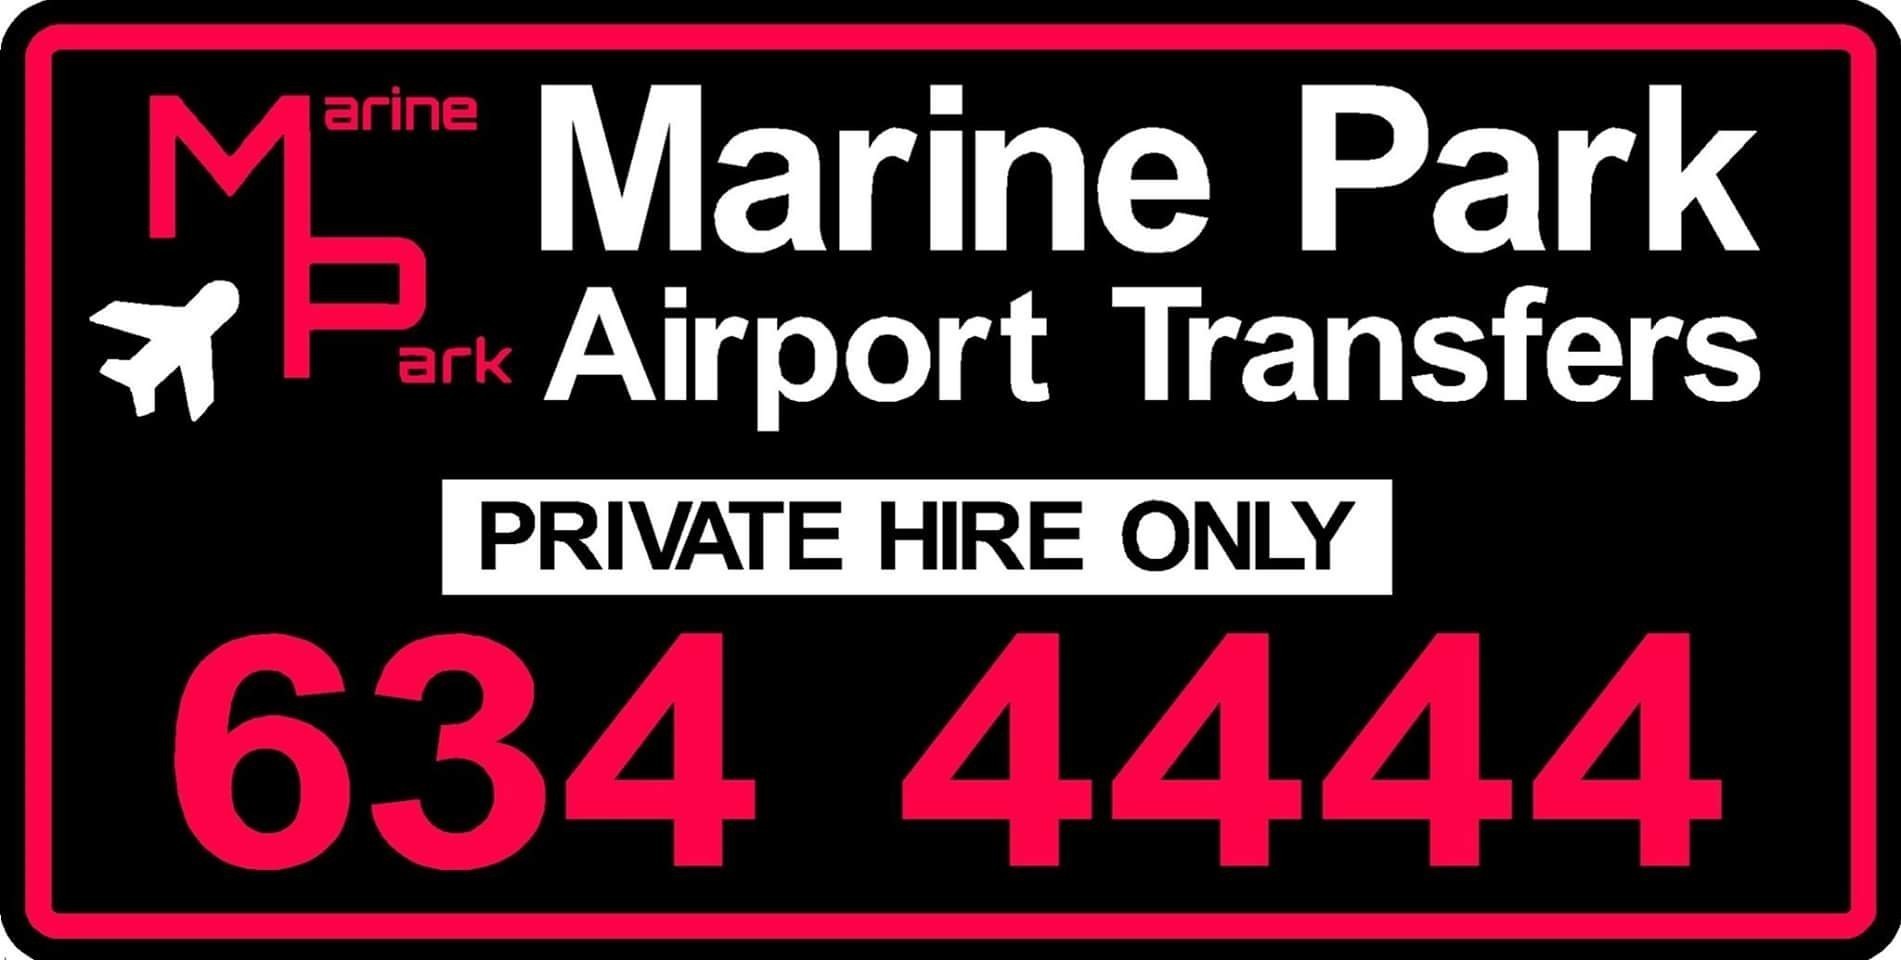 Wirral Airport Taxi Travel Services | Marine Park Transfers | 12 Brackley Close, Wallasey CH44 3EJ | +44 151 634 4444